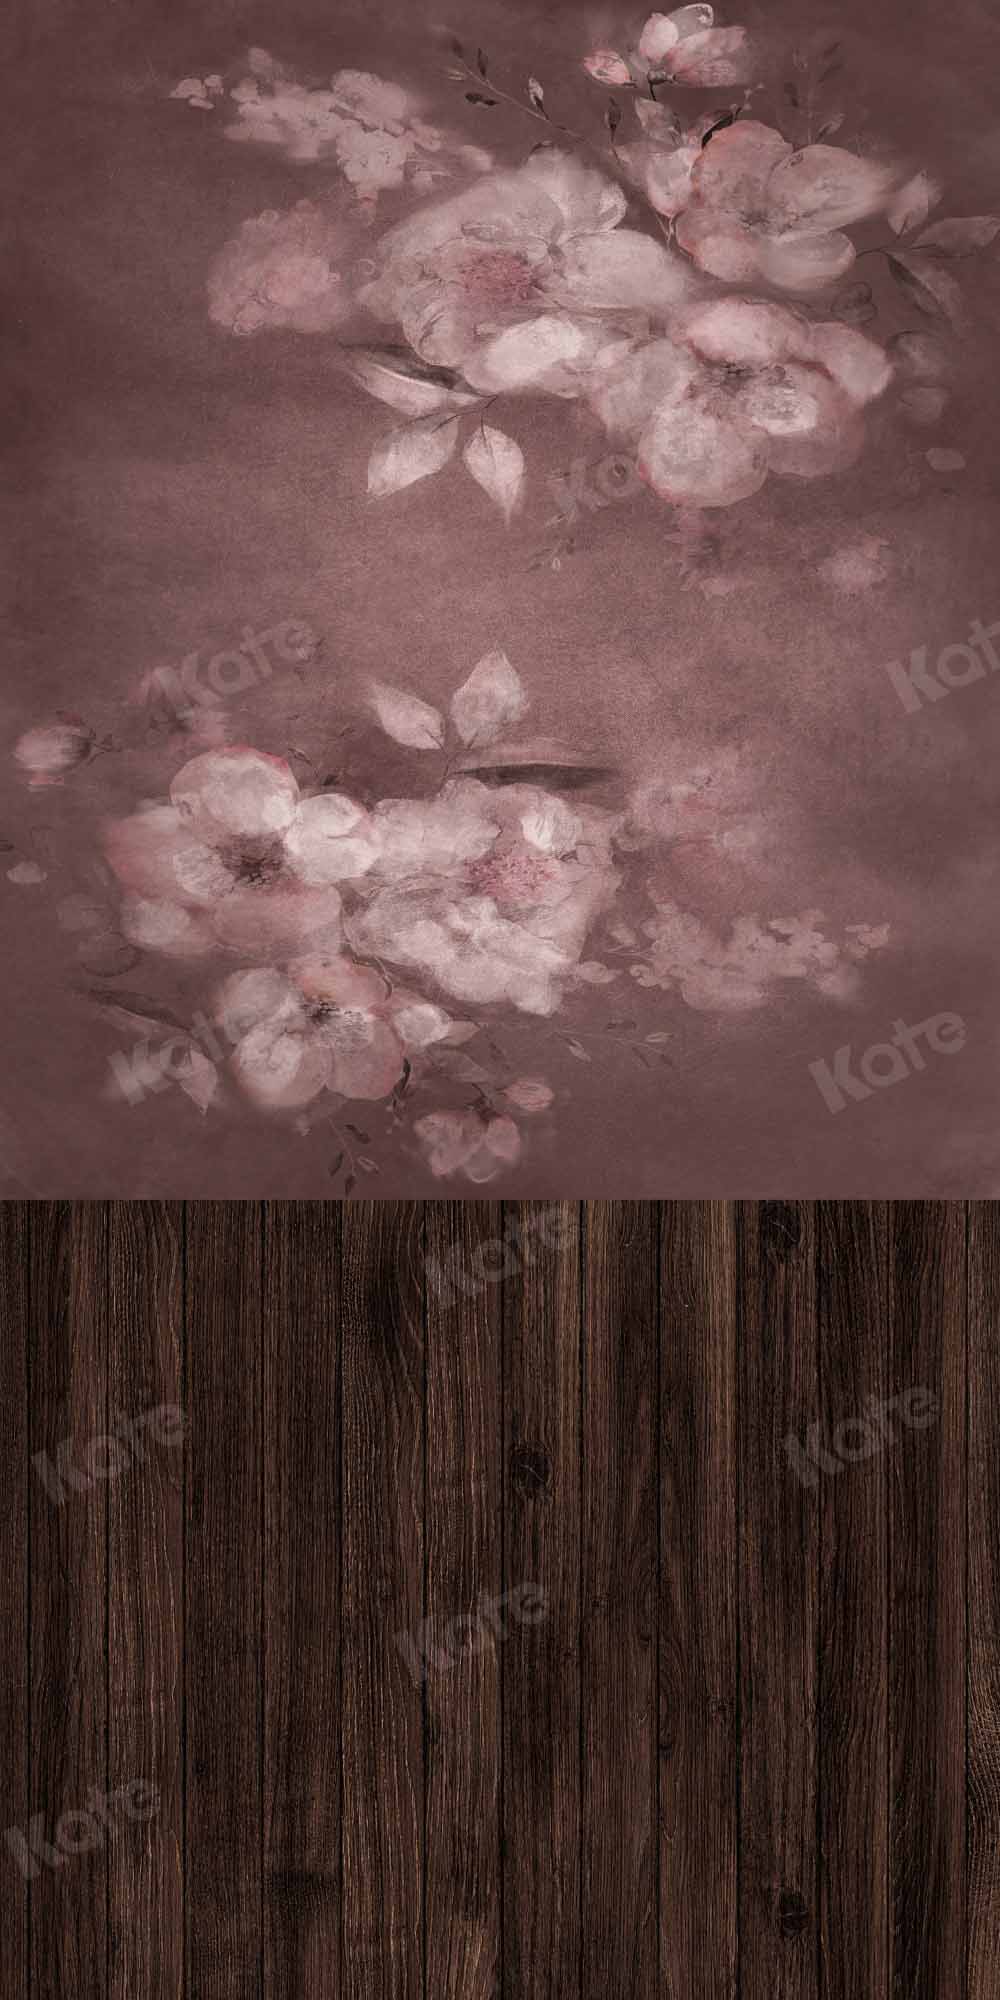 Kate Sweep Abstract Flower Backdrop Wood Board Stitching Designed by Chain Photographer